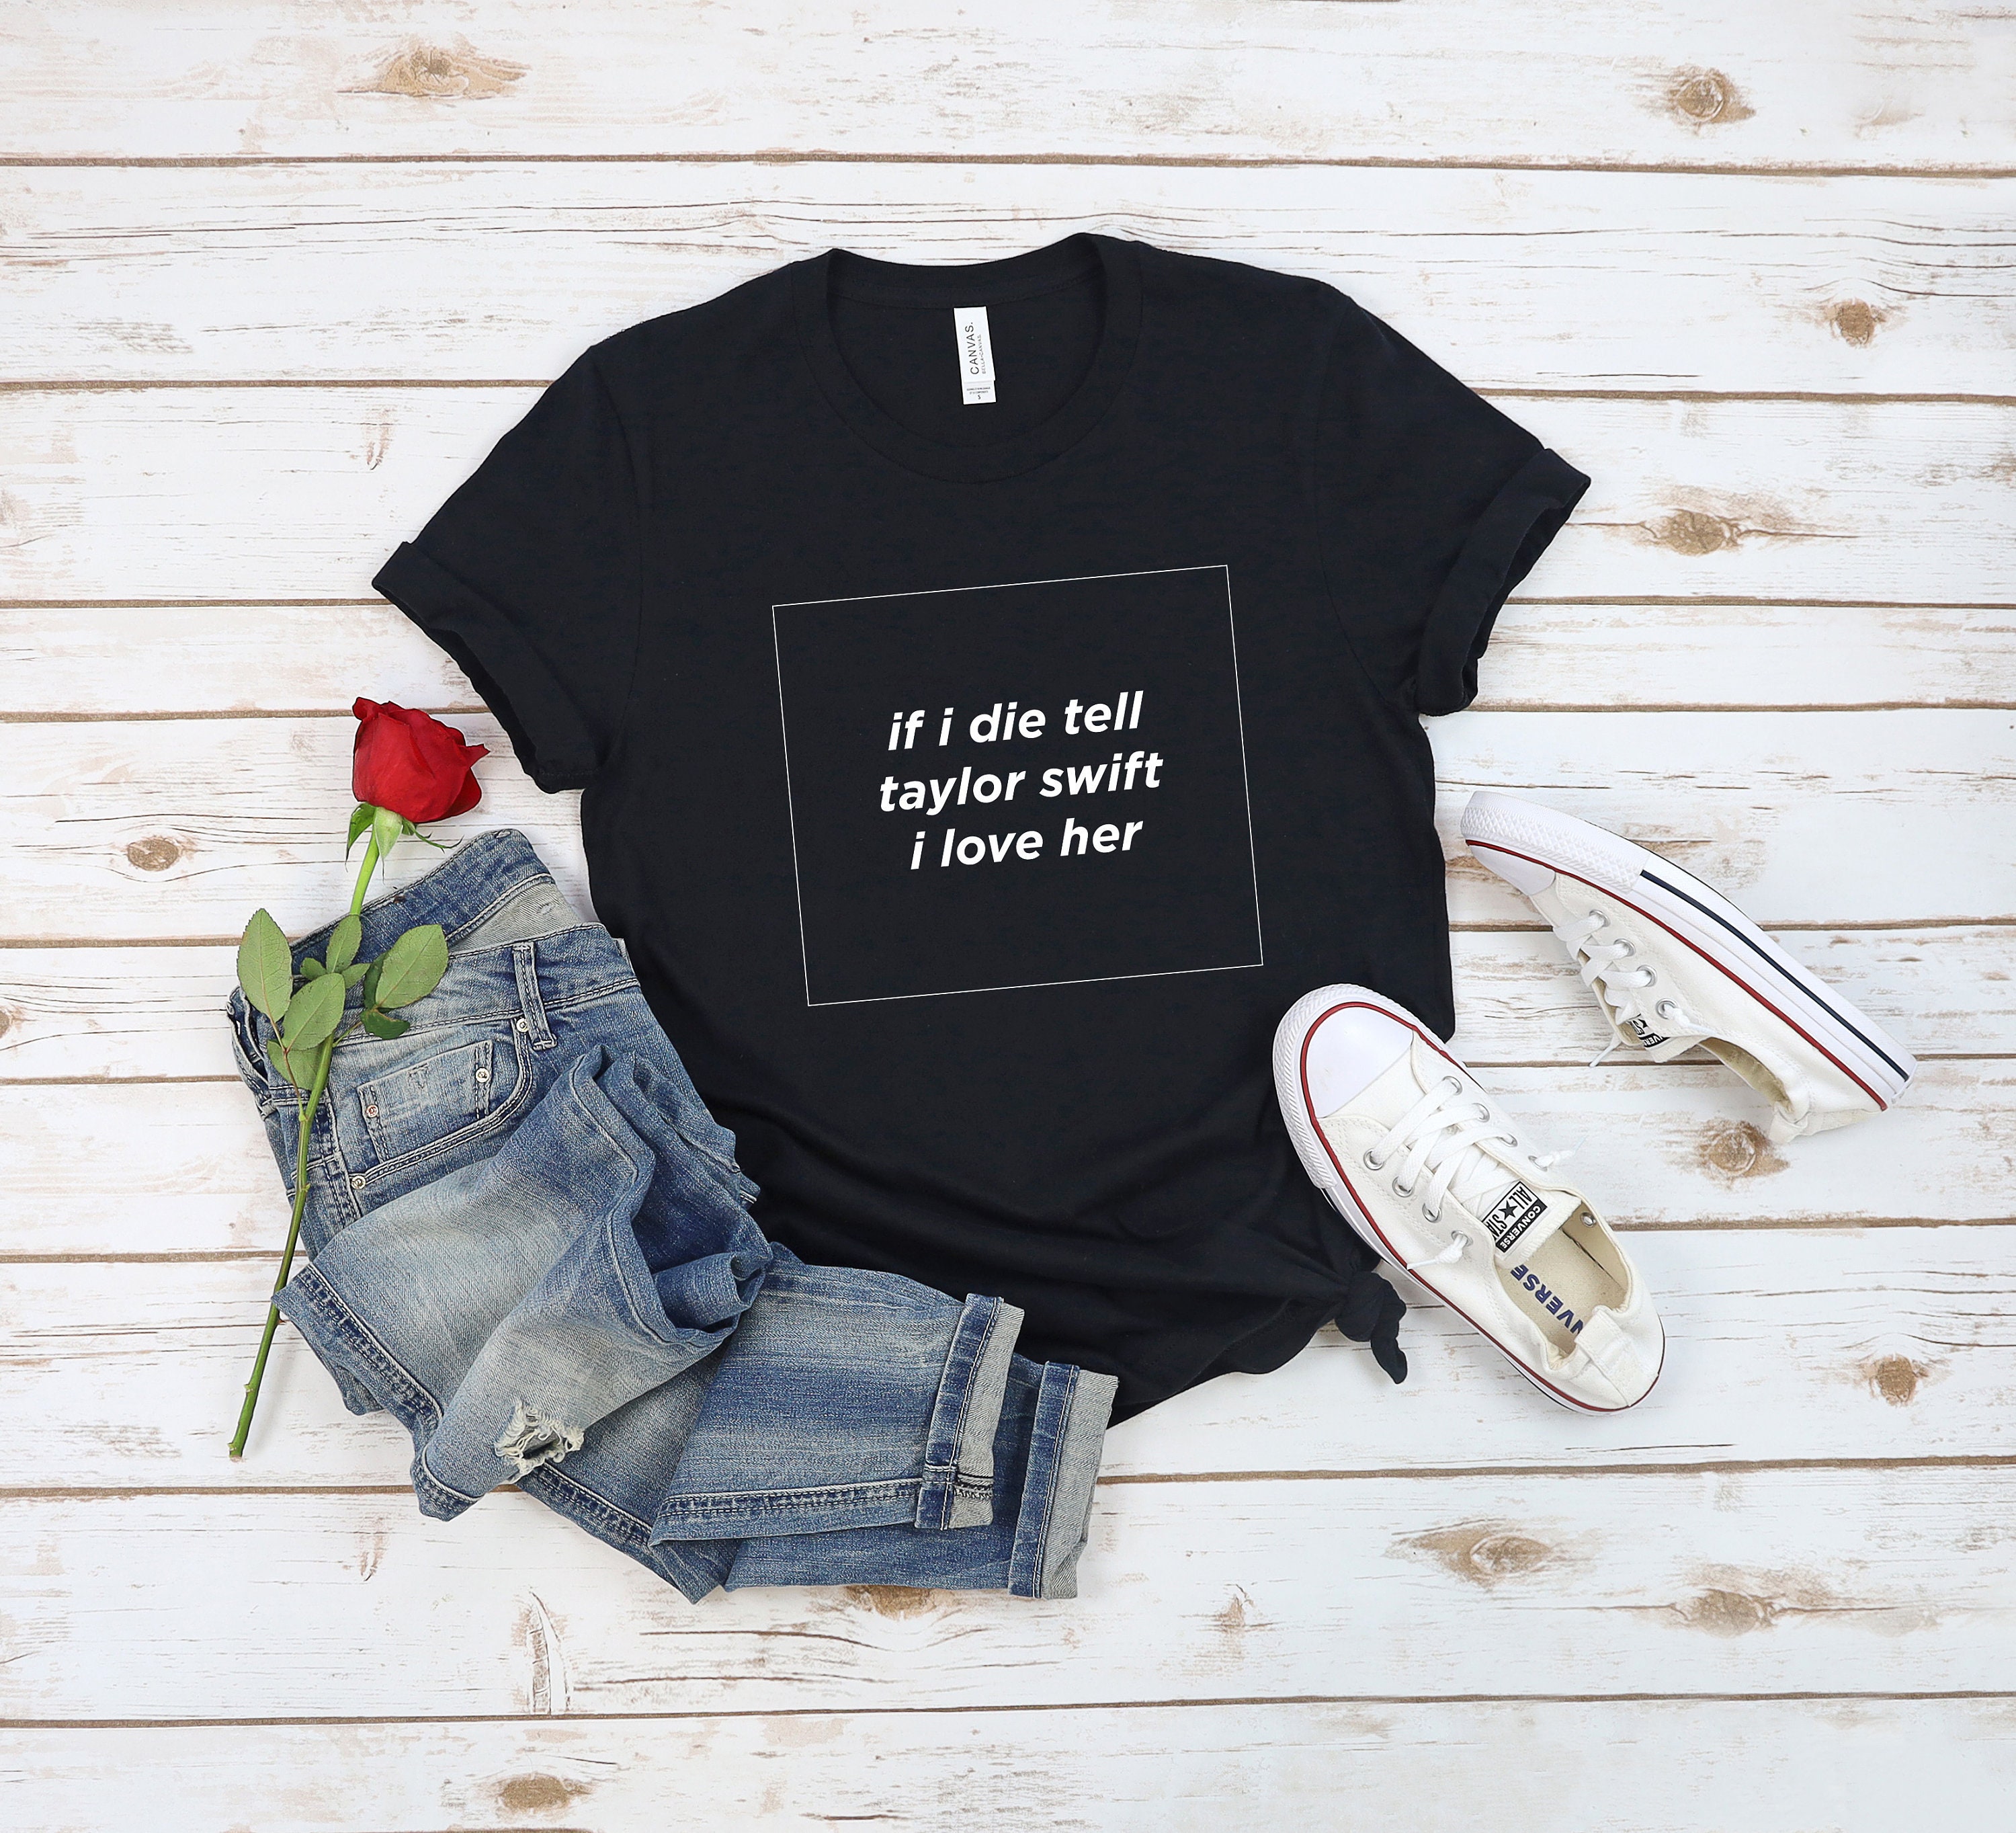 If Etsy Rose dripped Taylor Swifties Tee Tell Eras Funny Love Gift Shirt I Swift Etsy in for Norway - Tour Her Die Taylor Swift Fan Swiftie Merch I